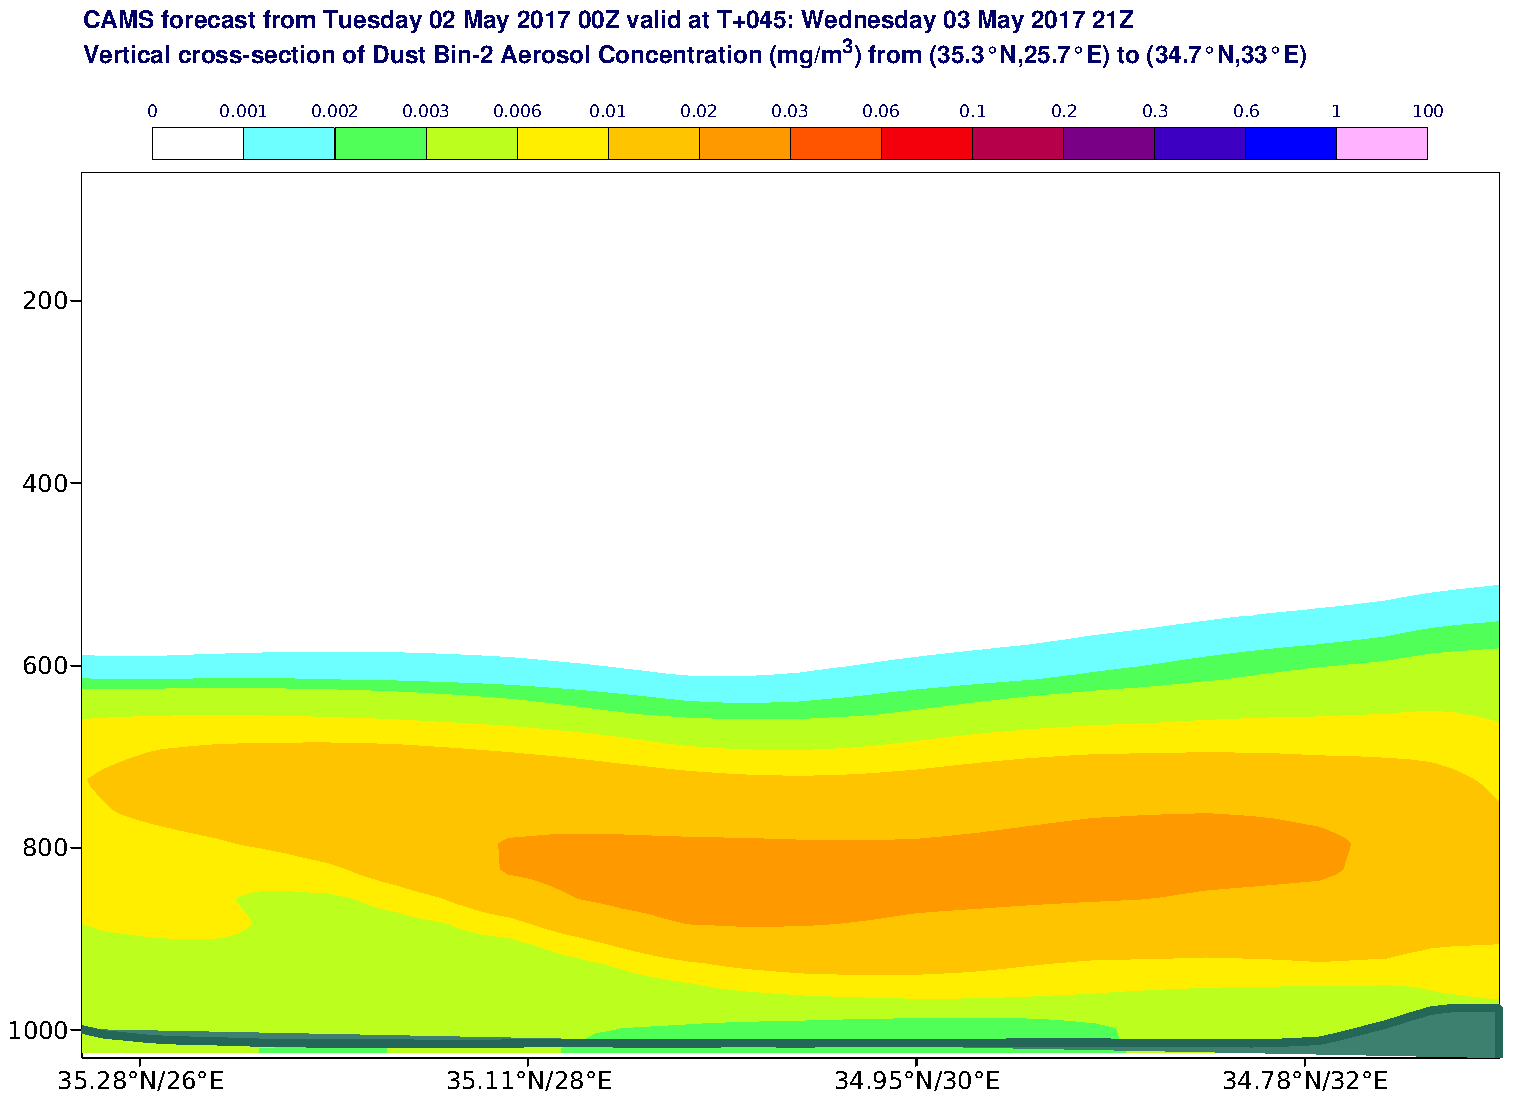 Vertical cross-section of Dust Bin-2 Aerosol Concentration (mg/m3) valid at T45 - 2017-05-03 21:00